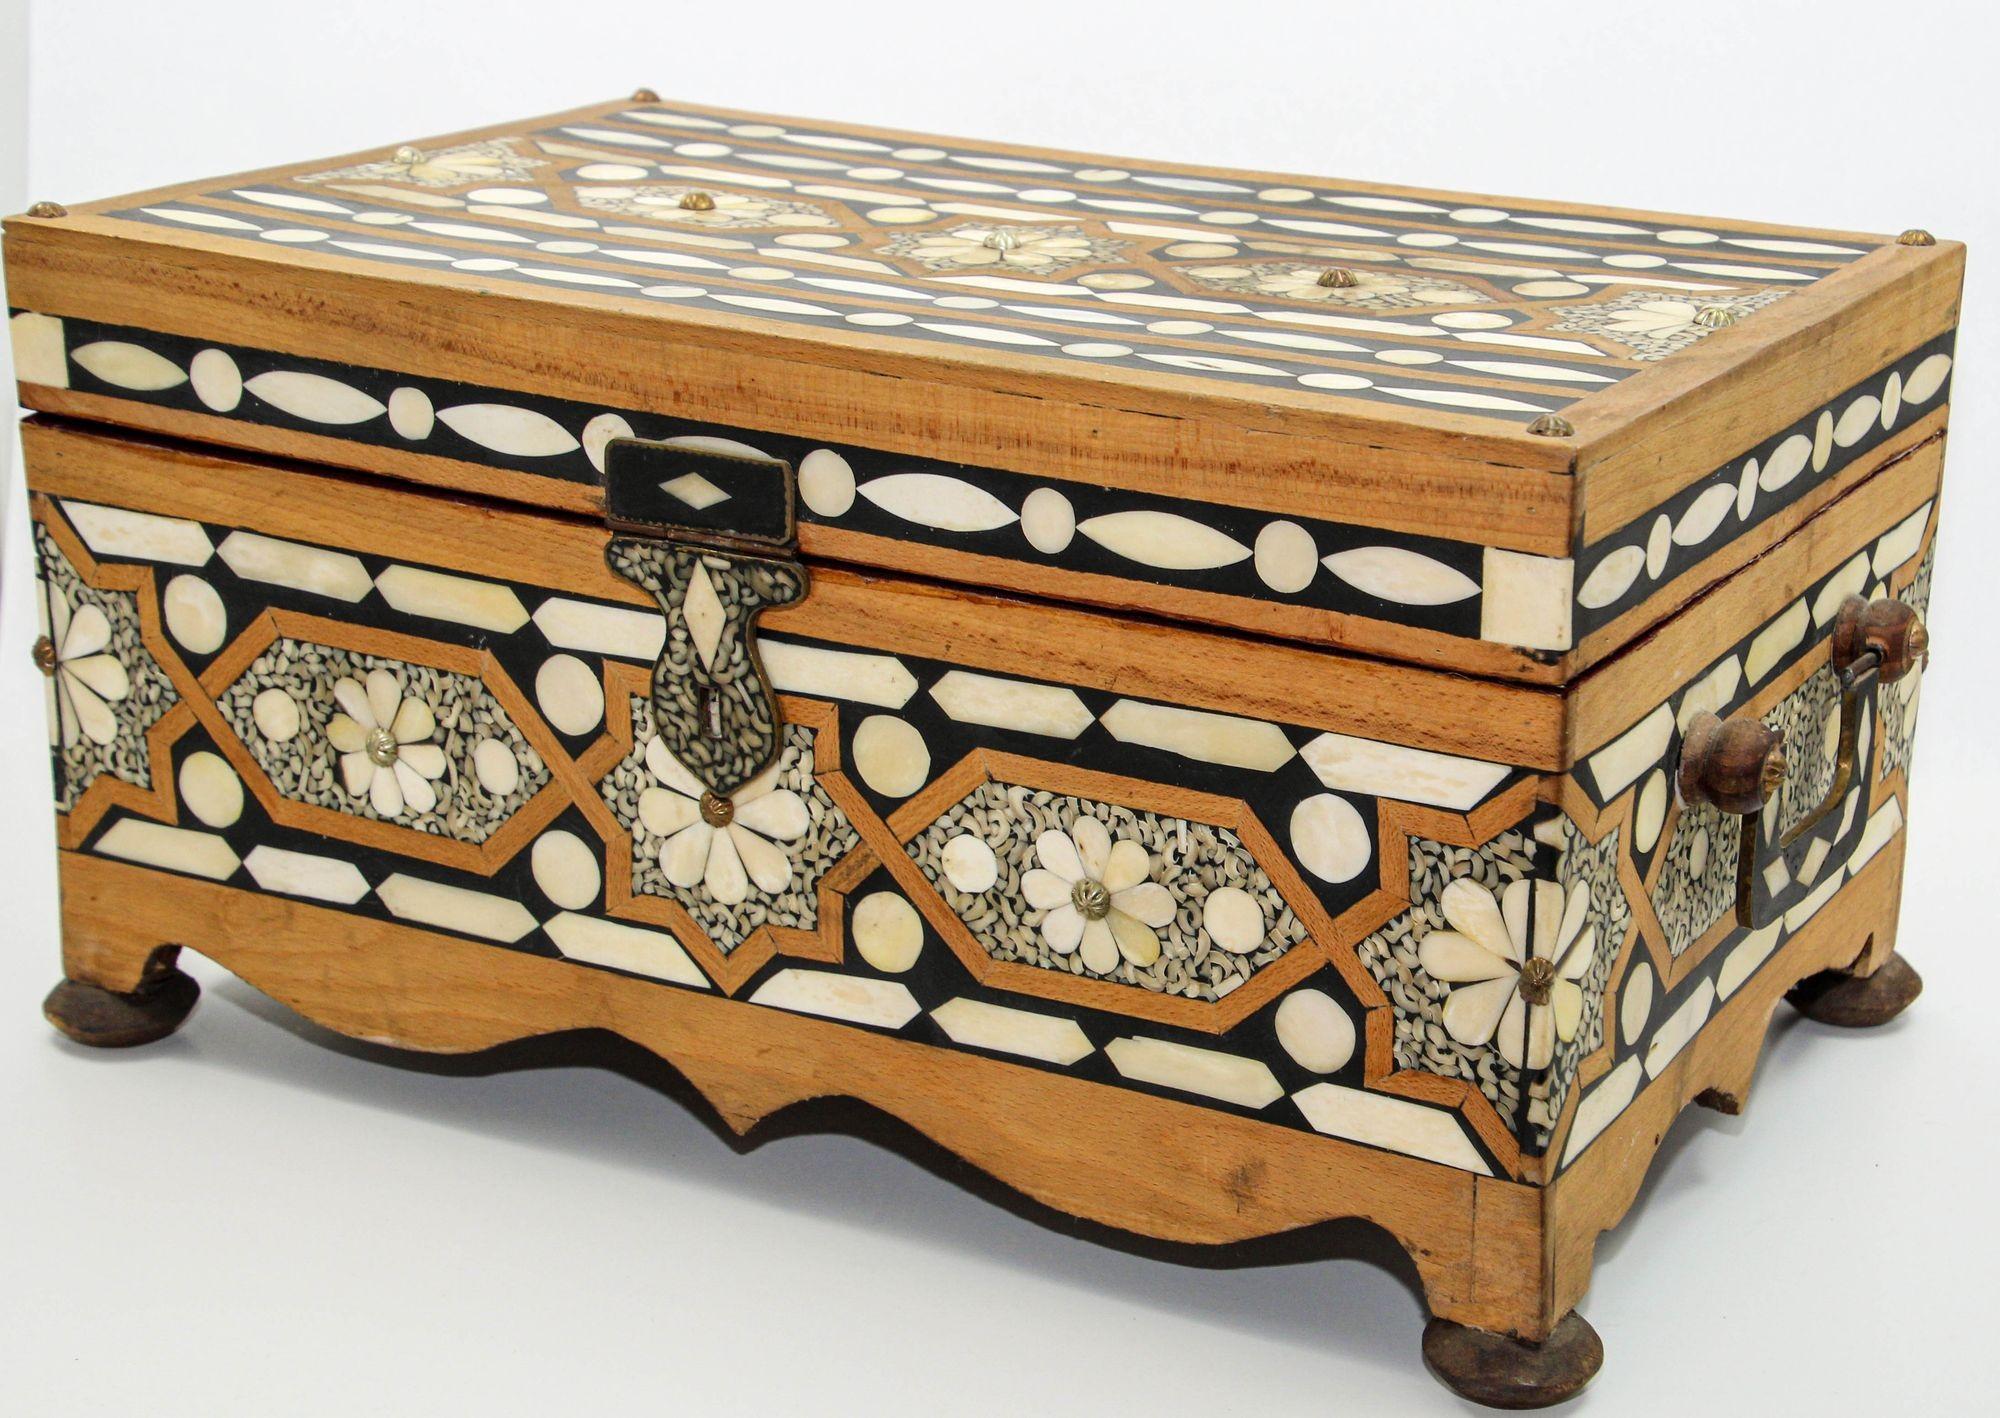 Moroccan Dowry Box Inlaid with White Camel Bone Rectangular Carved Wood Trunk For Sale 5